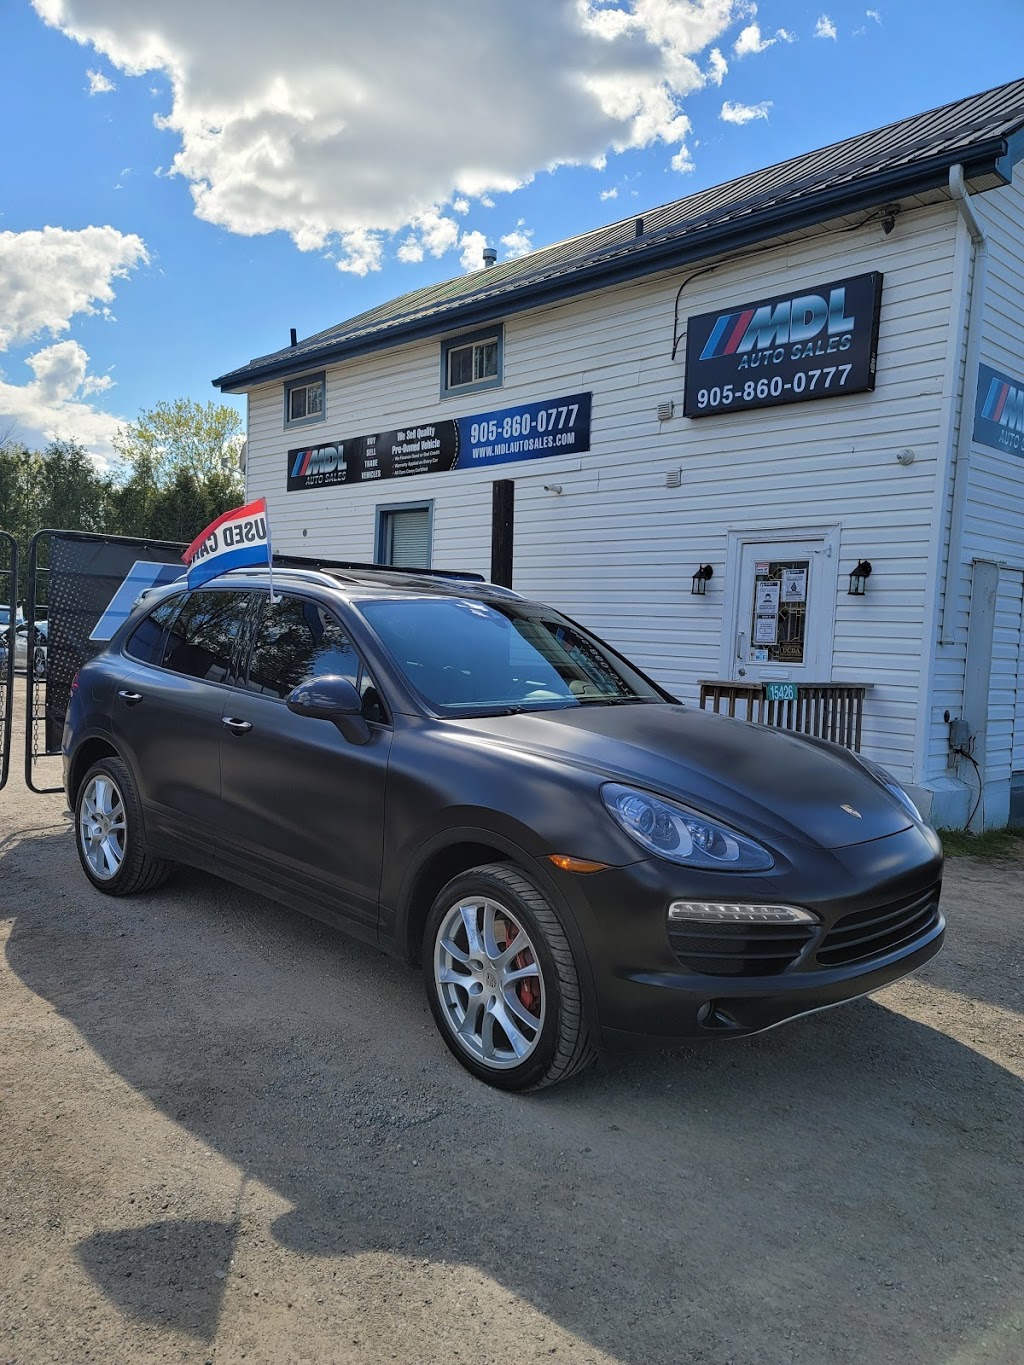 MDL Auto Sales | 15426 Airport Rd, Caledon East, ON L7C 1E6, Canada | Phone: (905) 860-0777